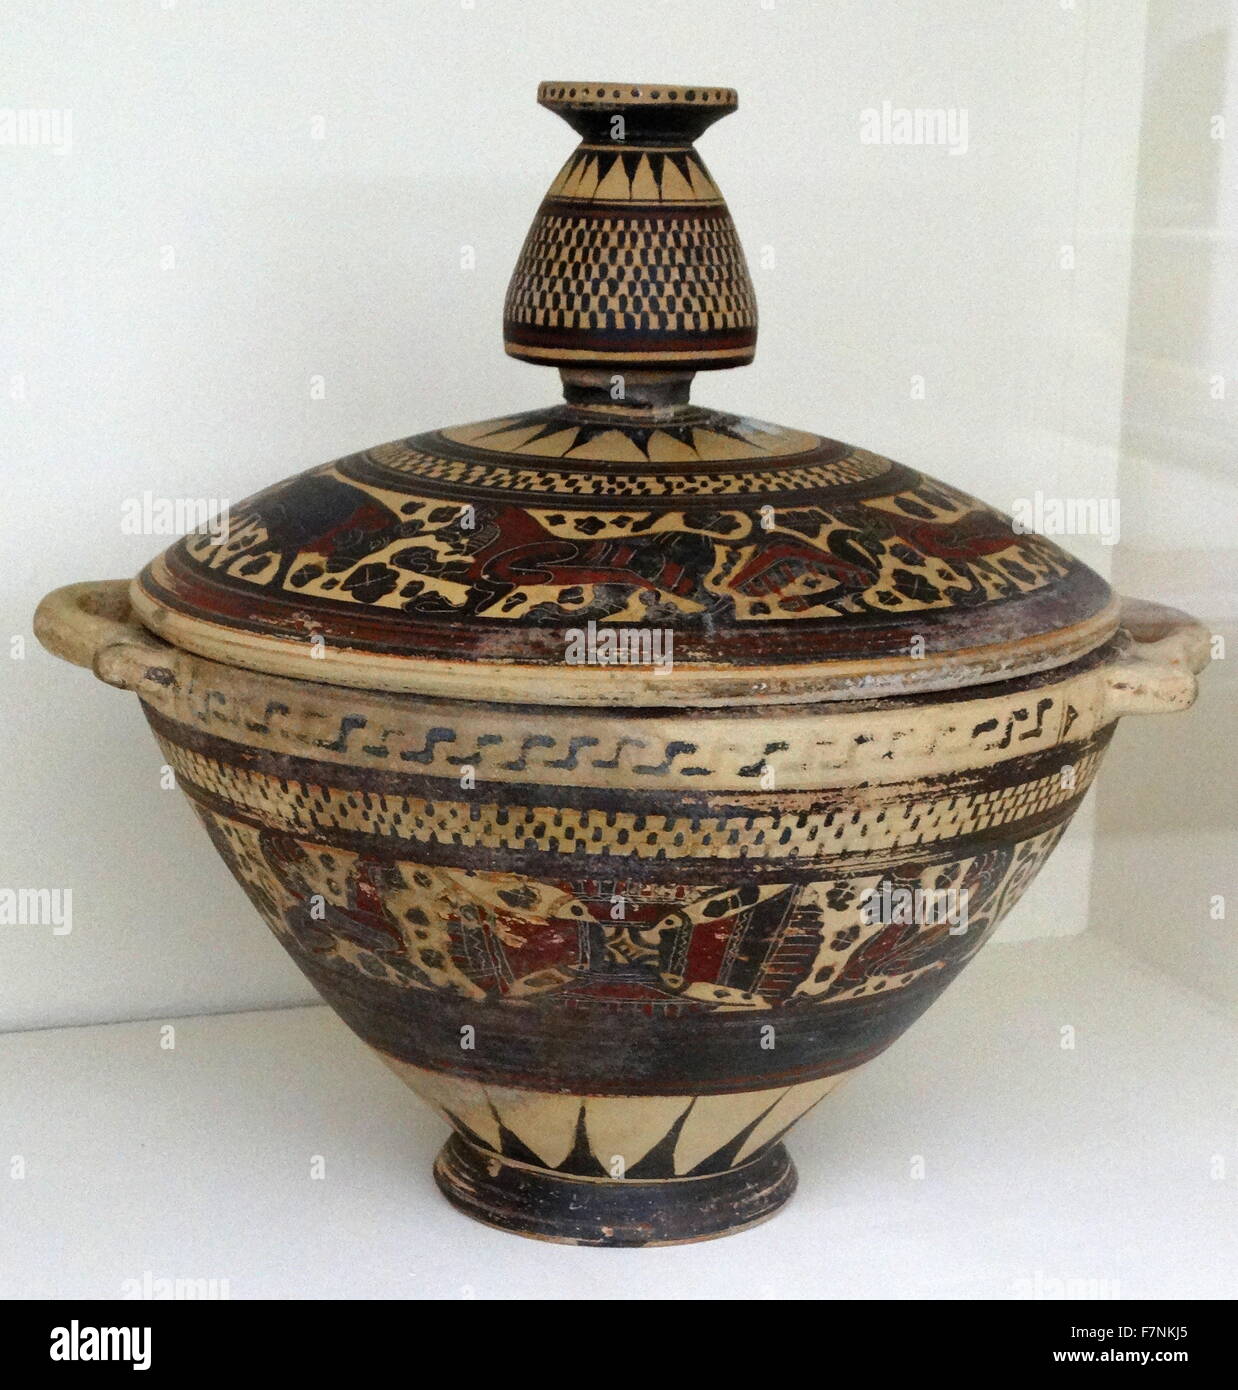 Deep bowl with lid (kotyle-pyxis) from Corinth. Decorated with real and mythical creatures including boars, bulls, birds, lions and sphinxes. Dated 600 BC Stock Photo